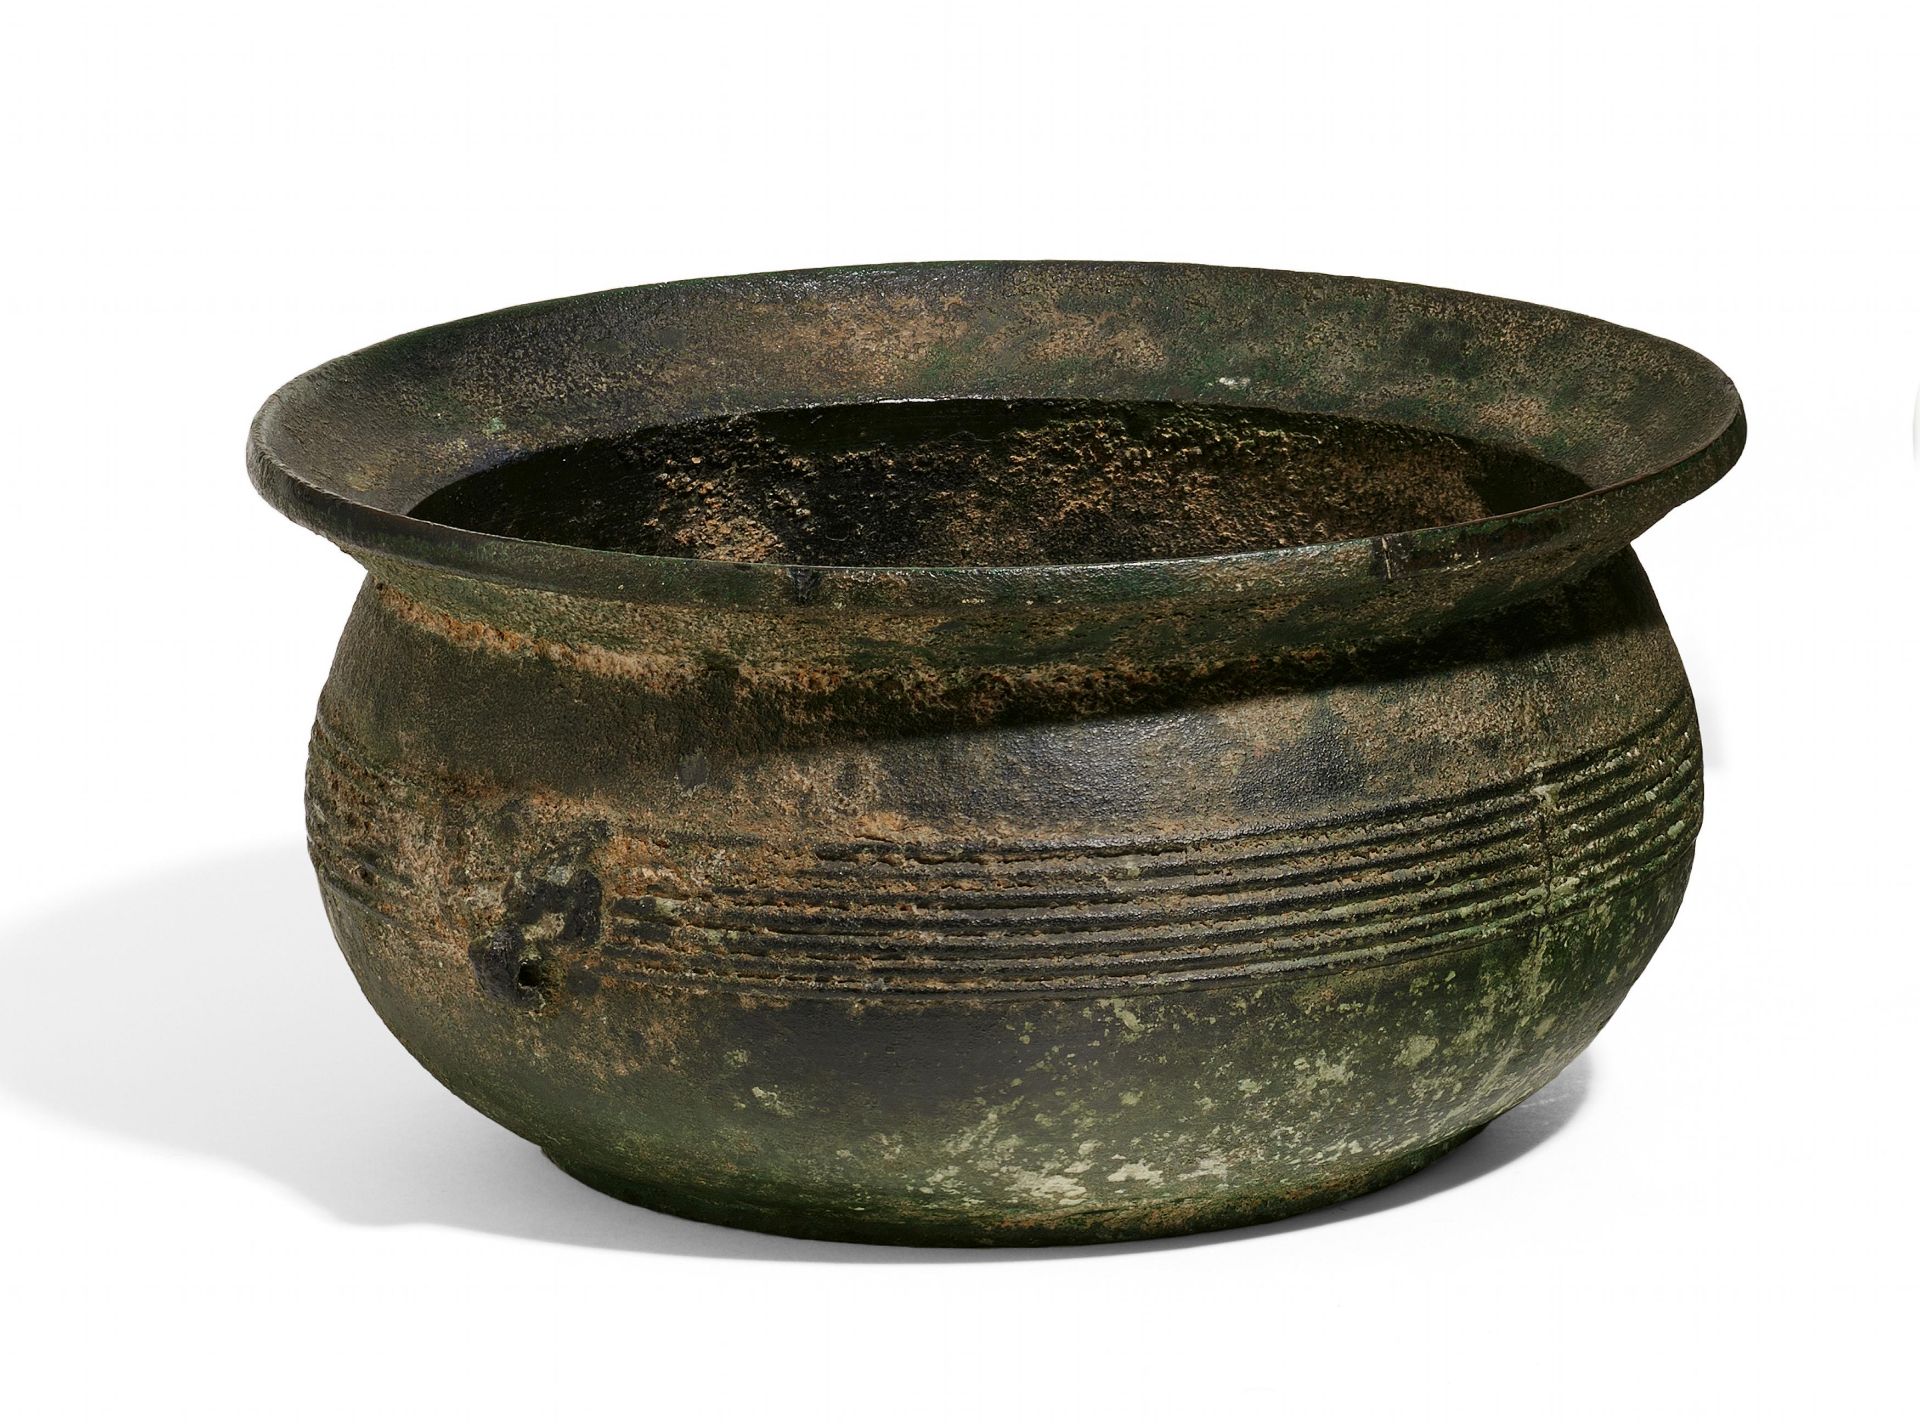 LARGE AND RARE BRONZE BASIN. Origin: China. Dynasty: Western Han dynasty (206 BC - 6 AD). Technique: